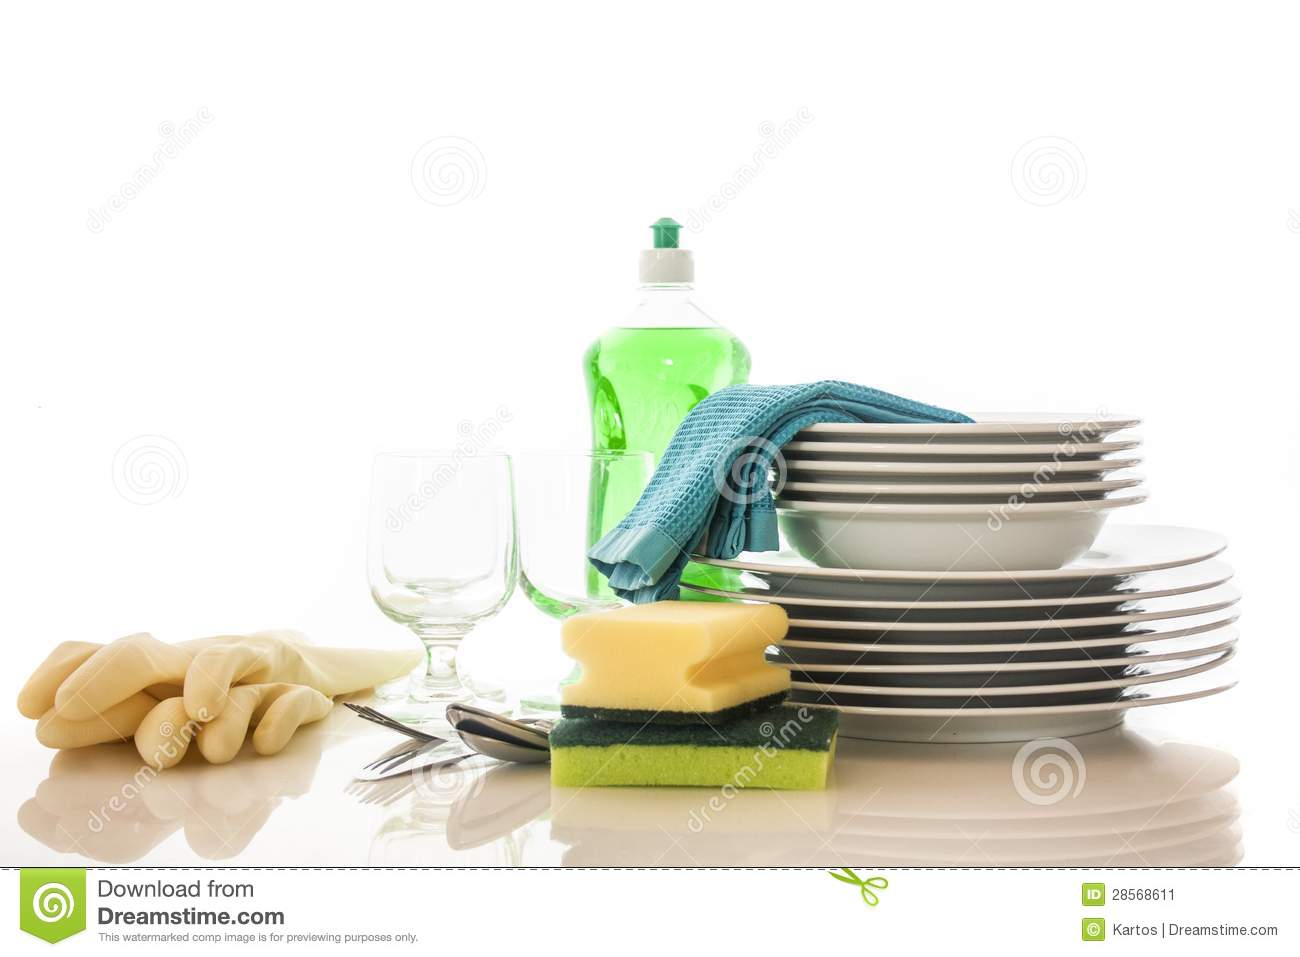 Clean Dishes Stock Image   Image  28568611